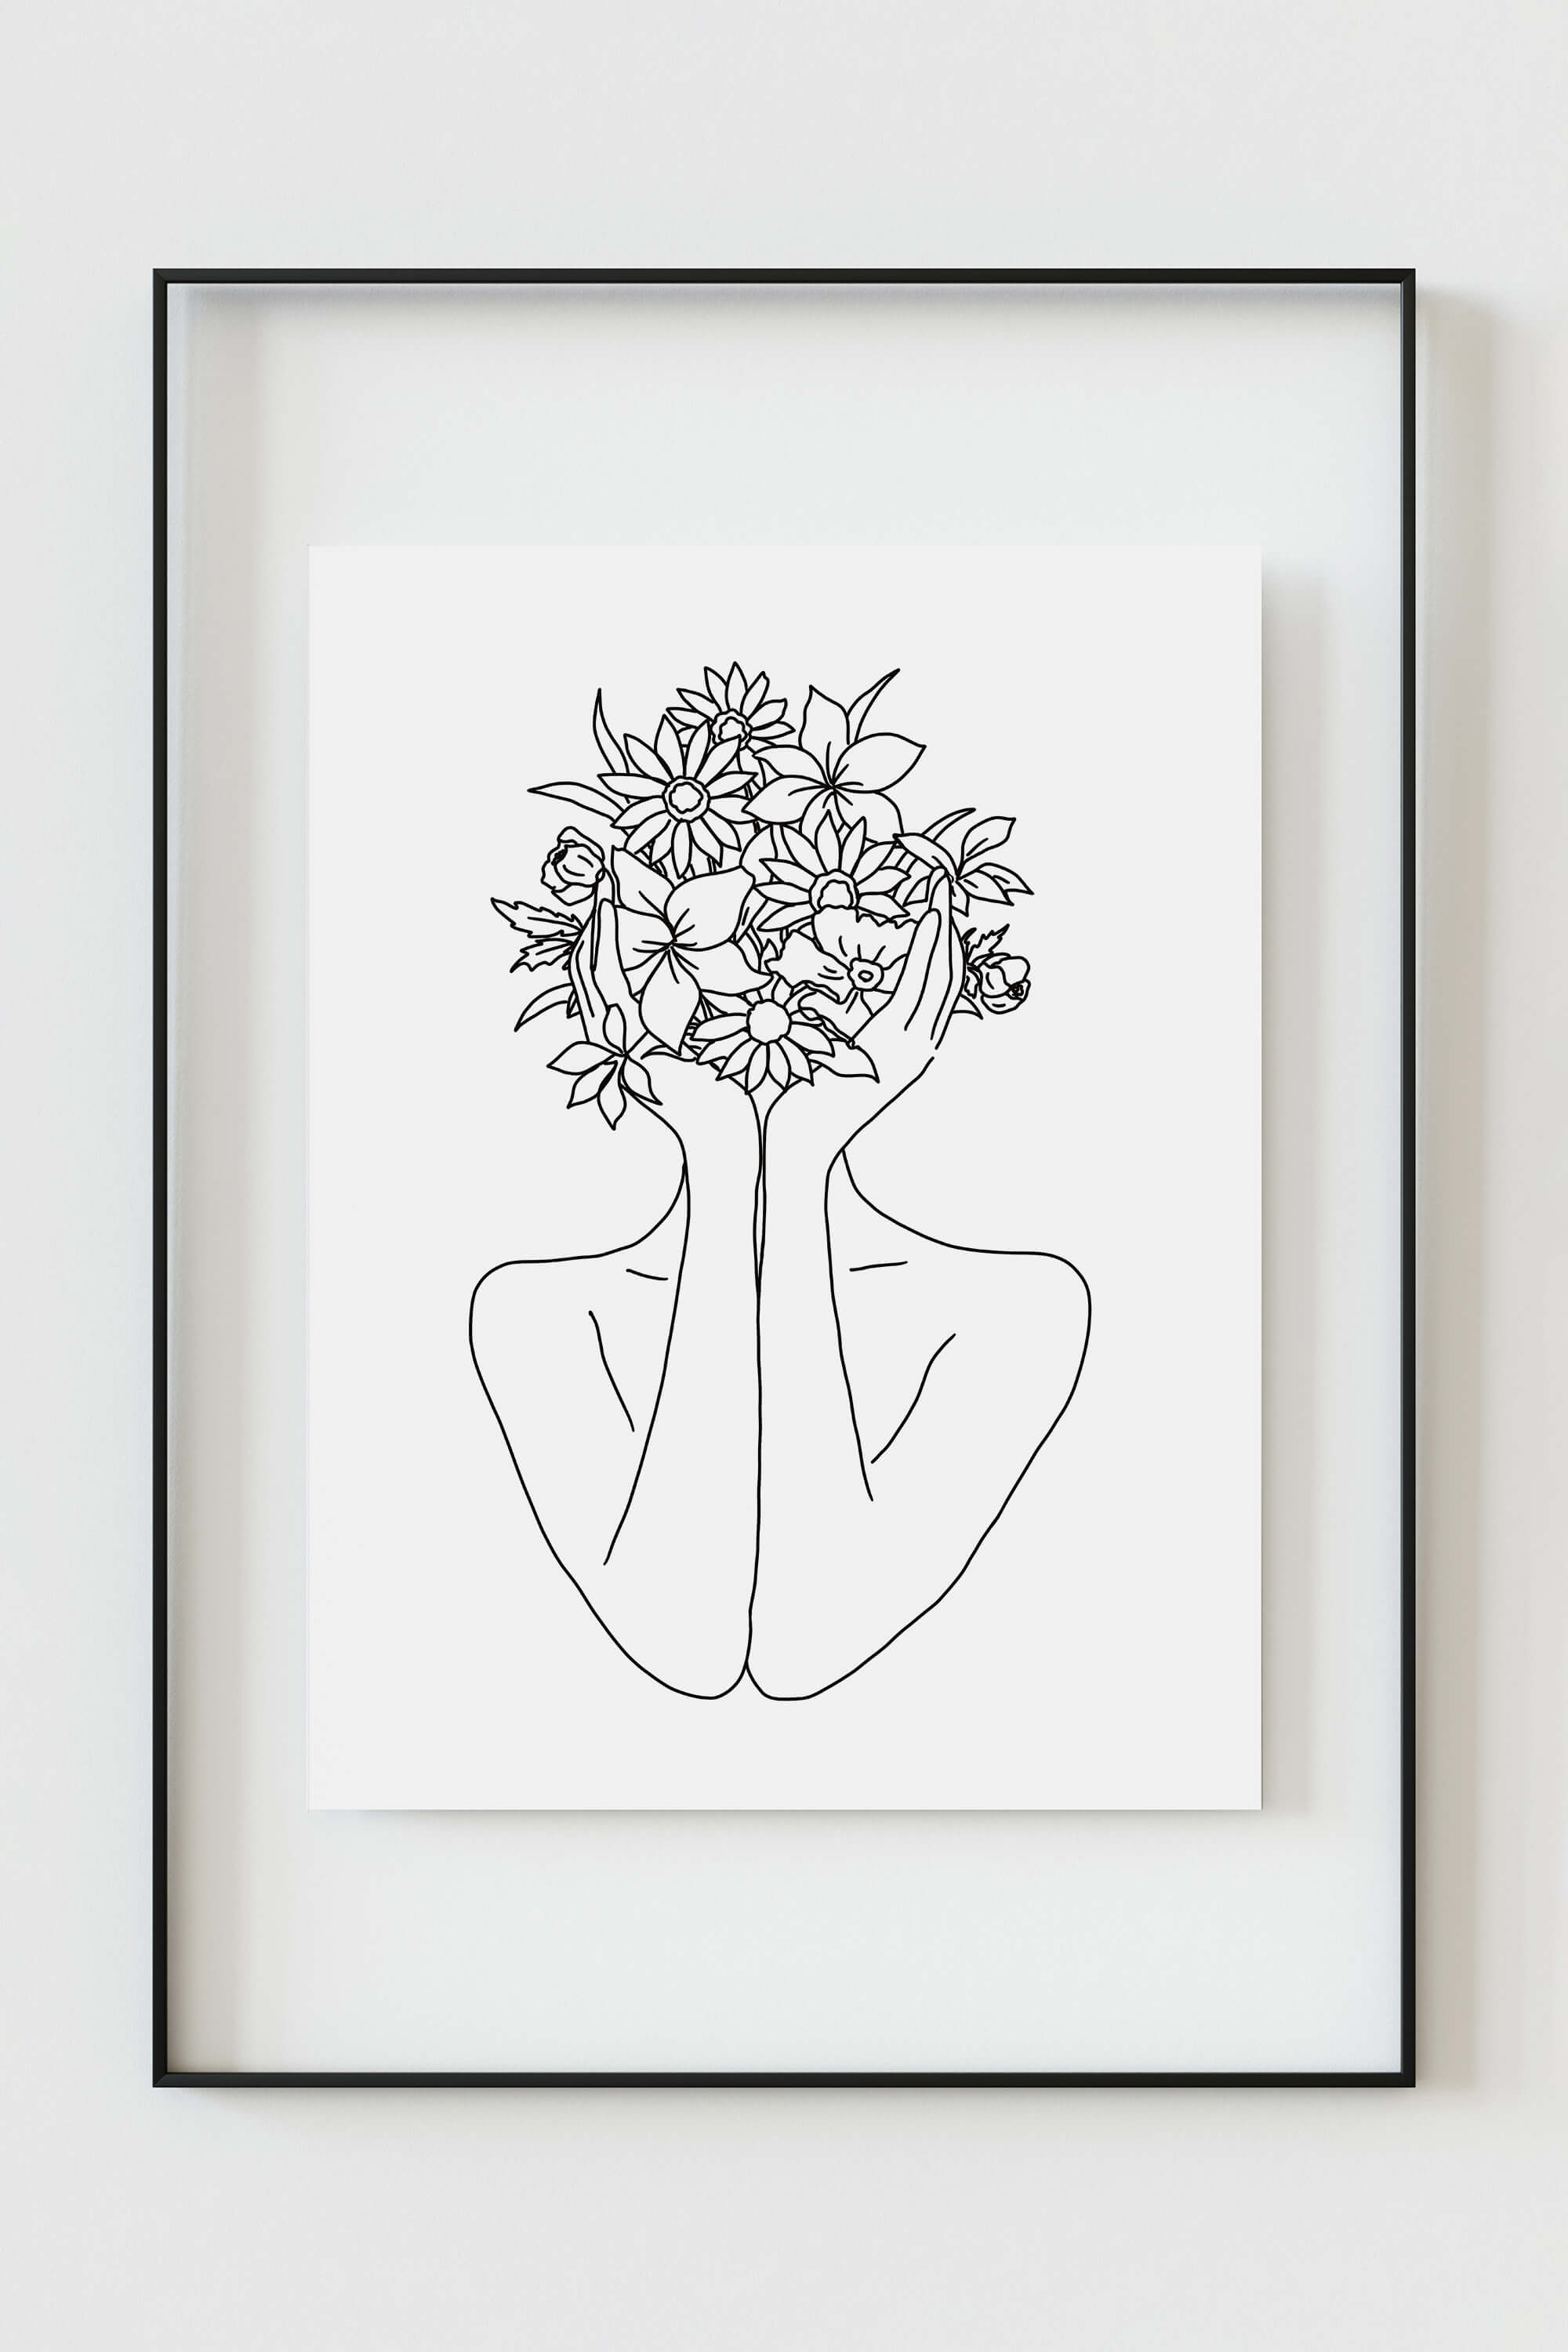 Modern floral art in a woman's line drawing featuring delicate hands and abstract flower elements. The fine details and free-flowing lines create a captivating visual experience.